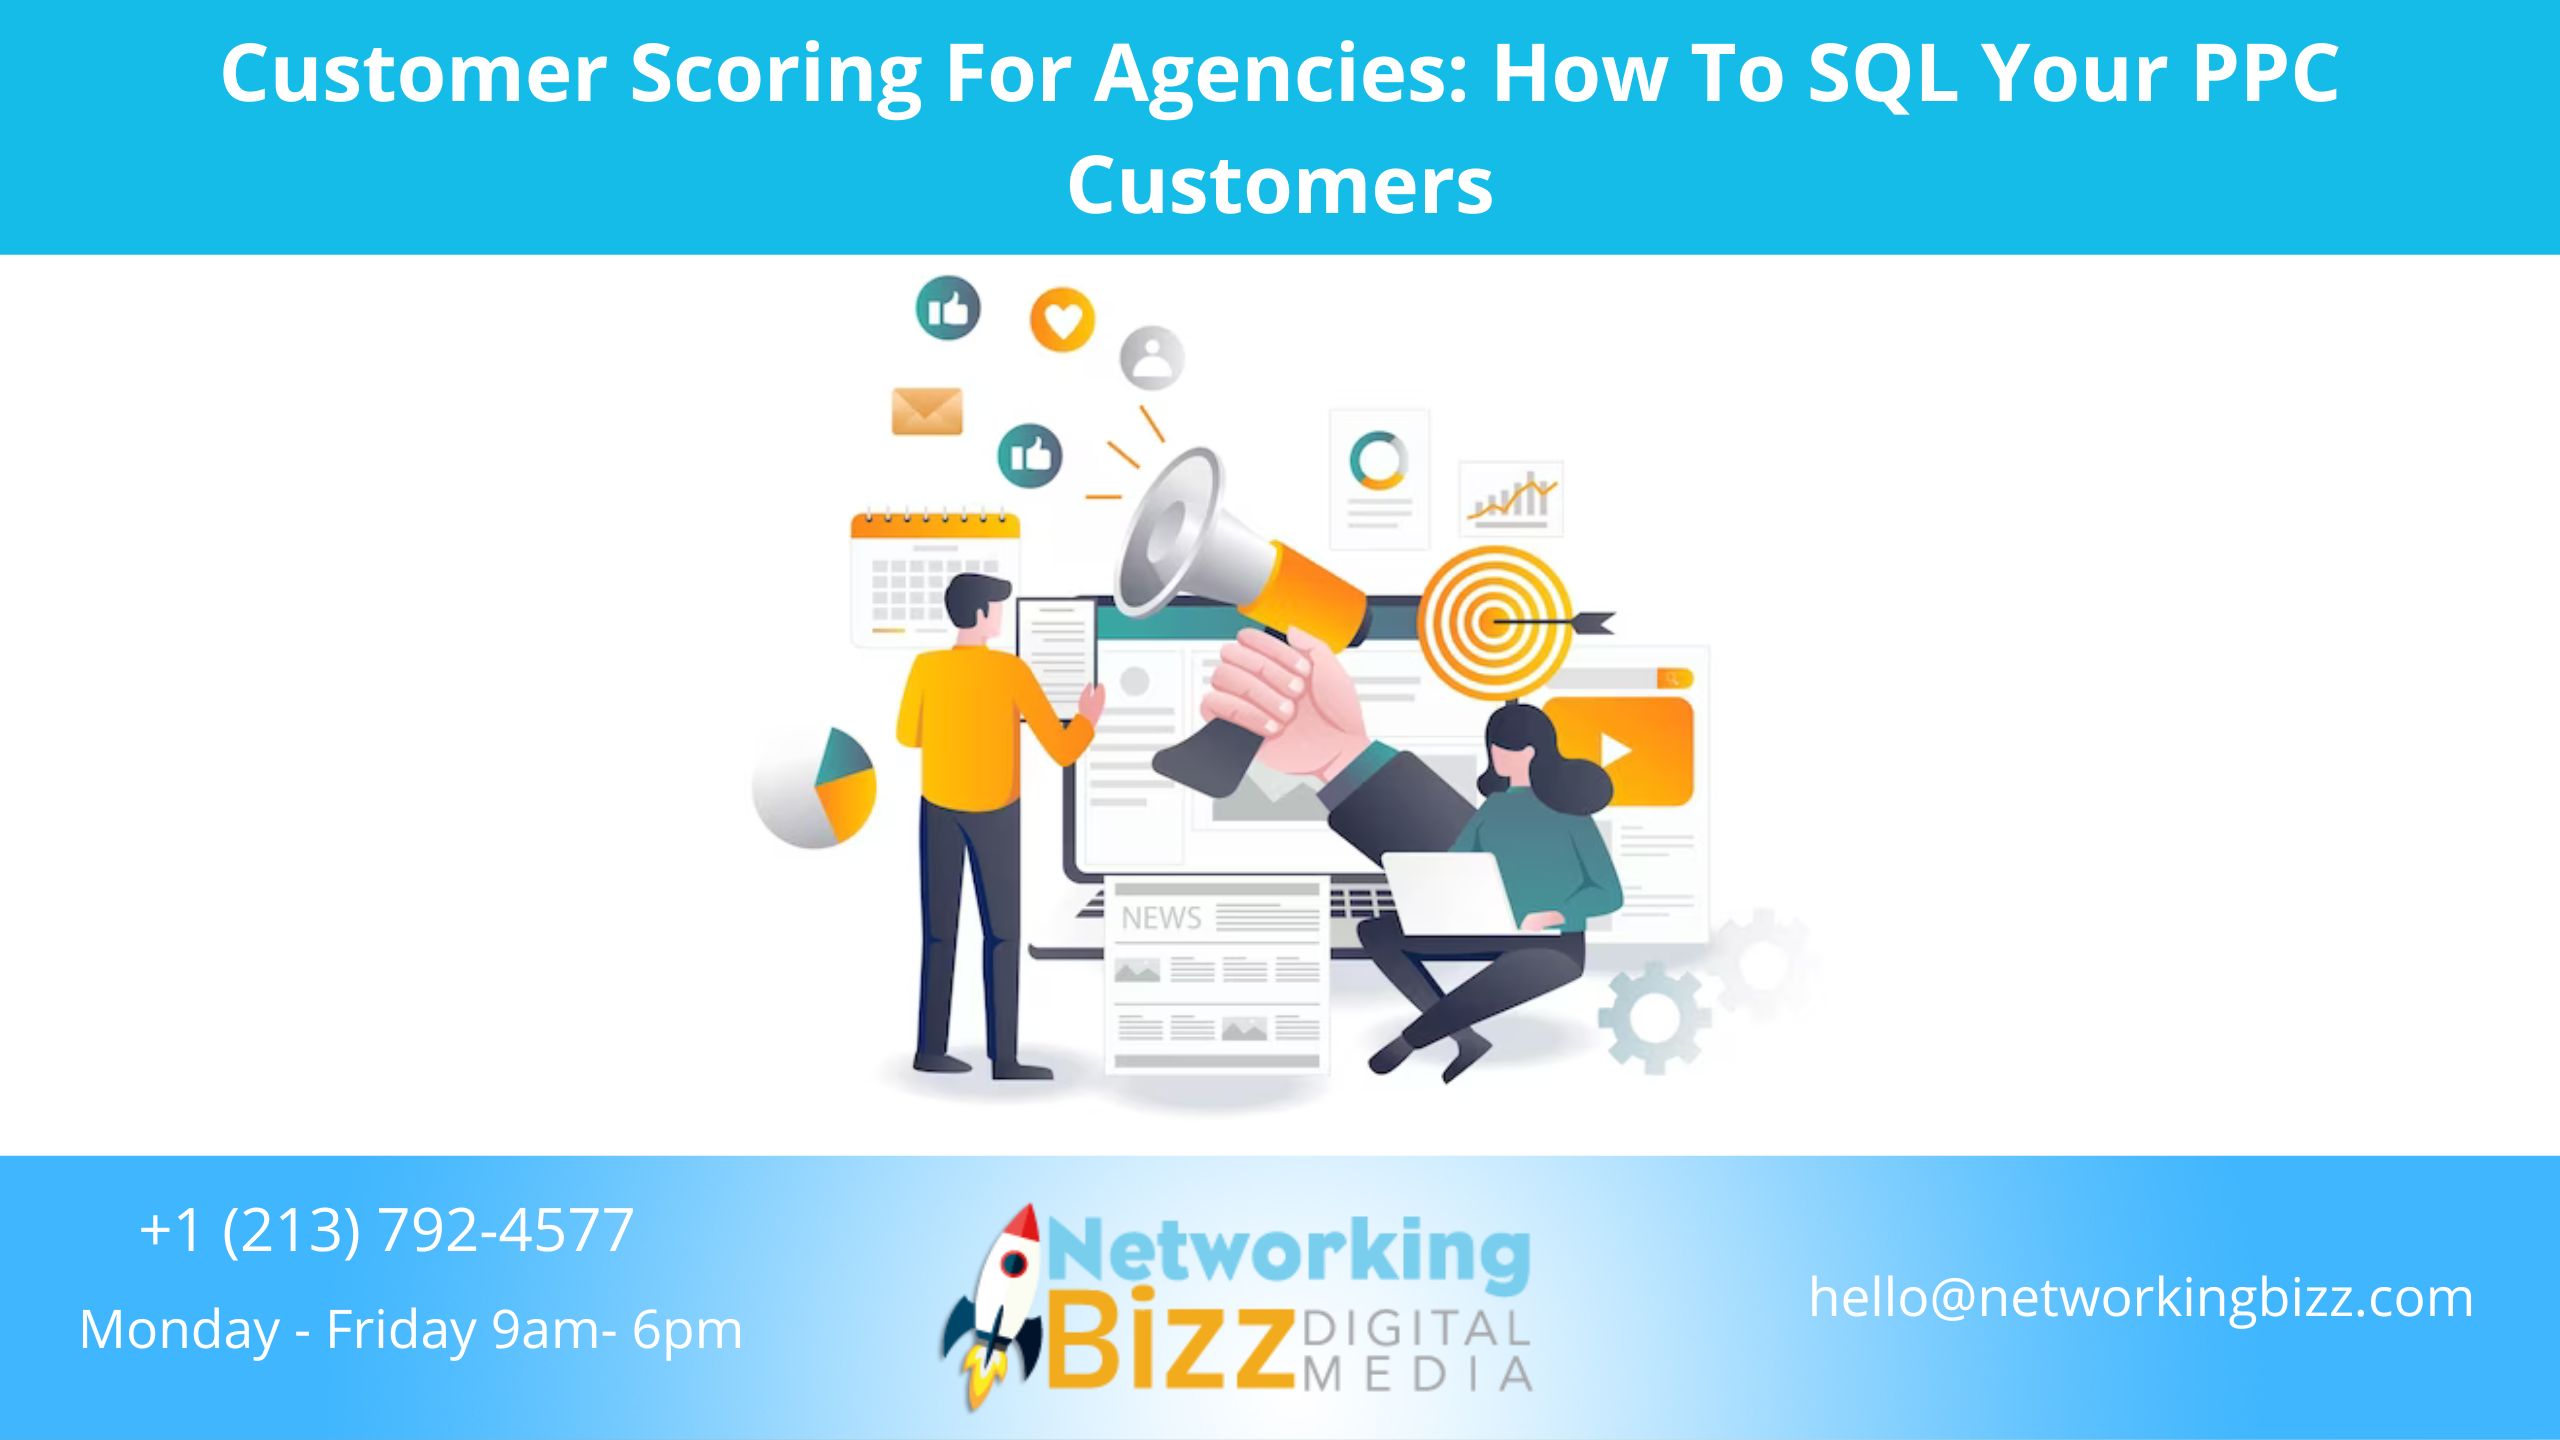 Customer Scoring For Agencies: How To SQL Your PPC Customers